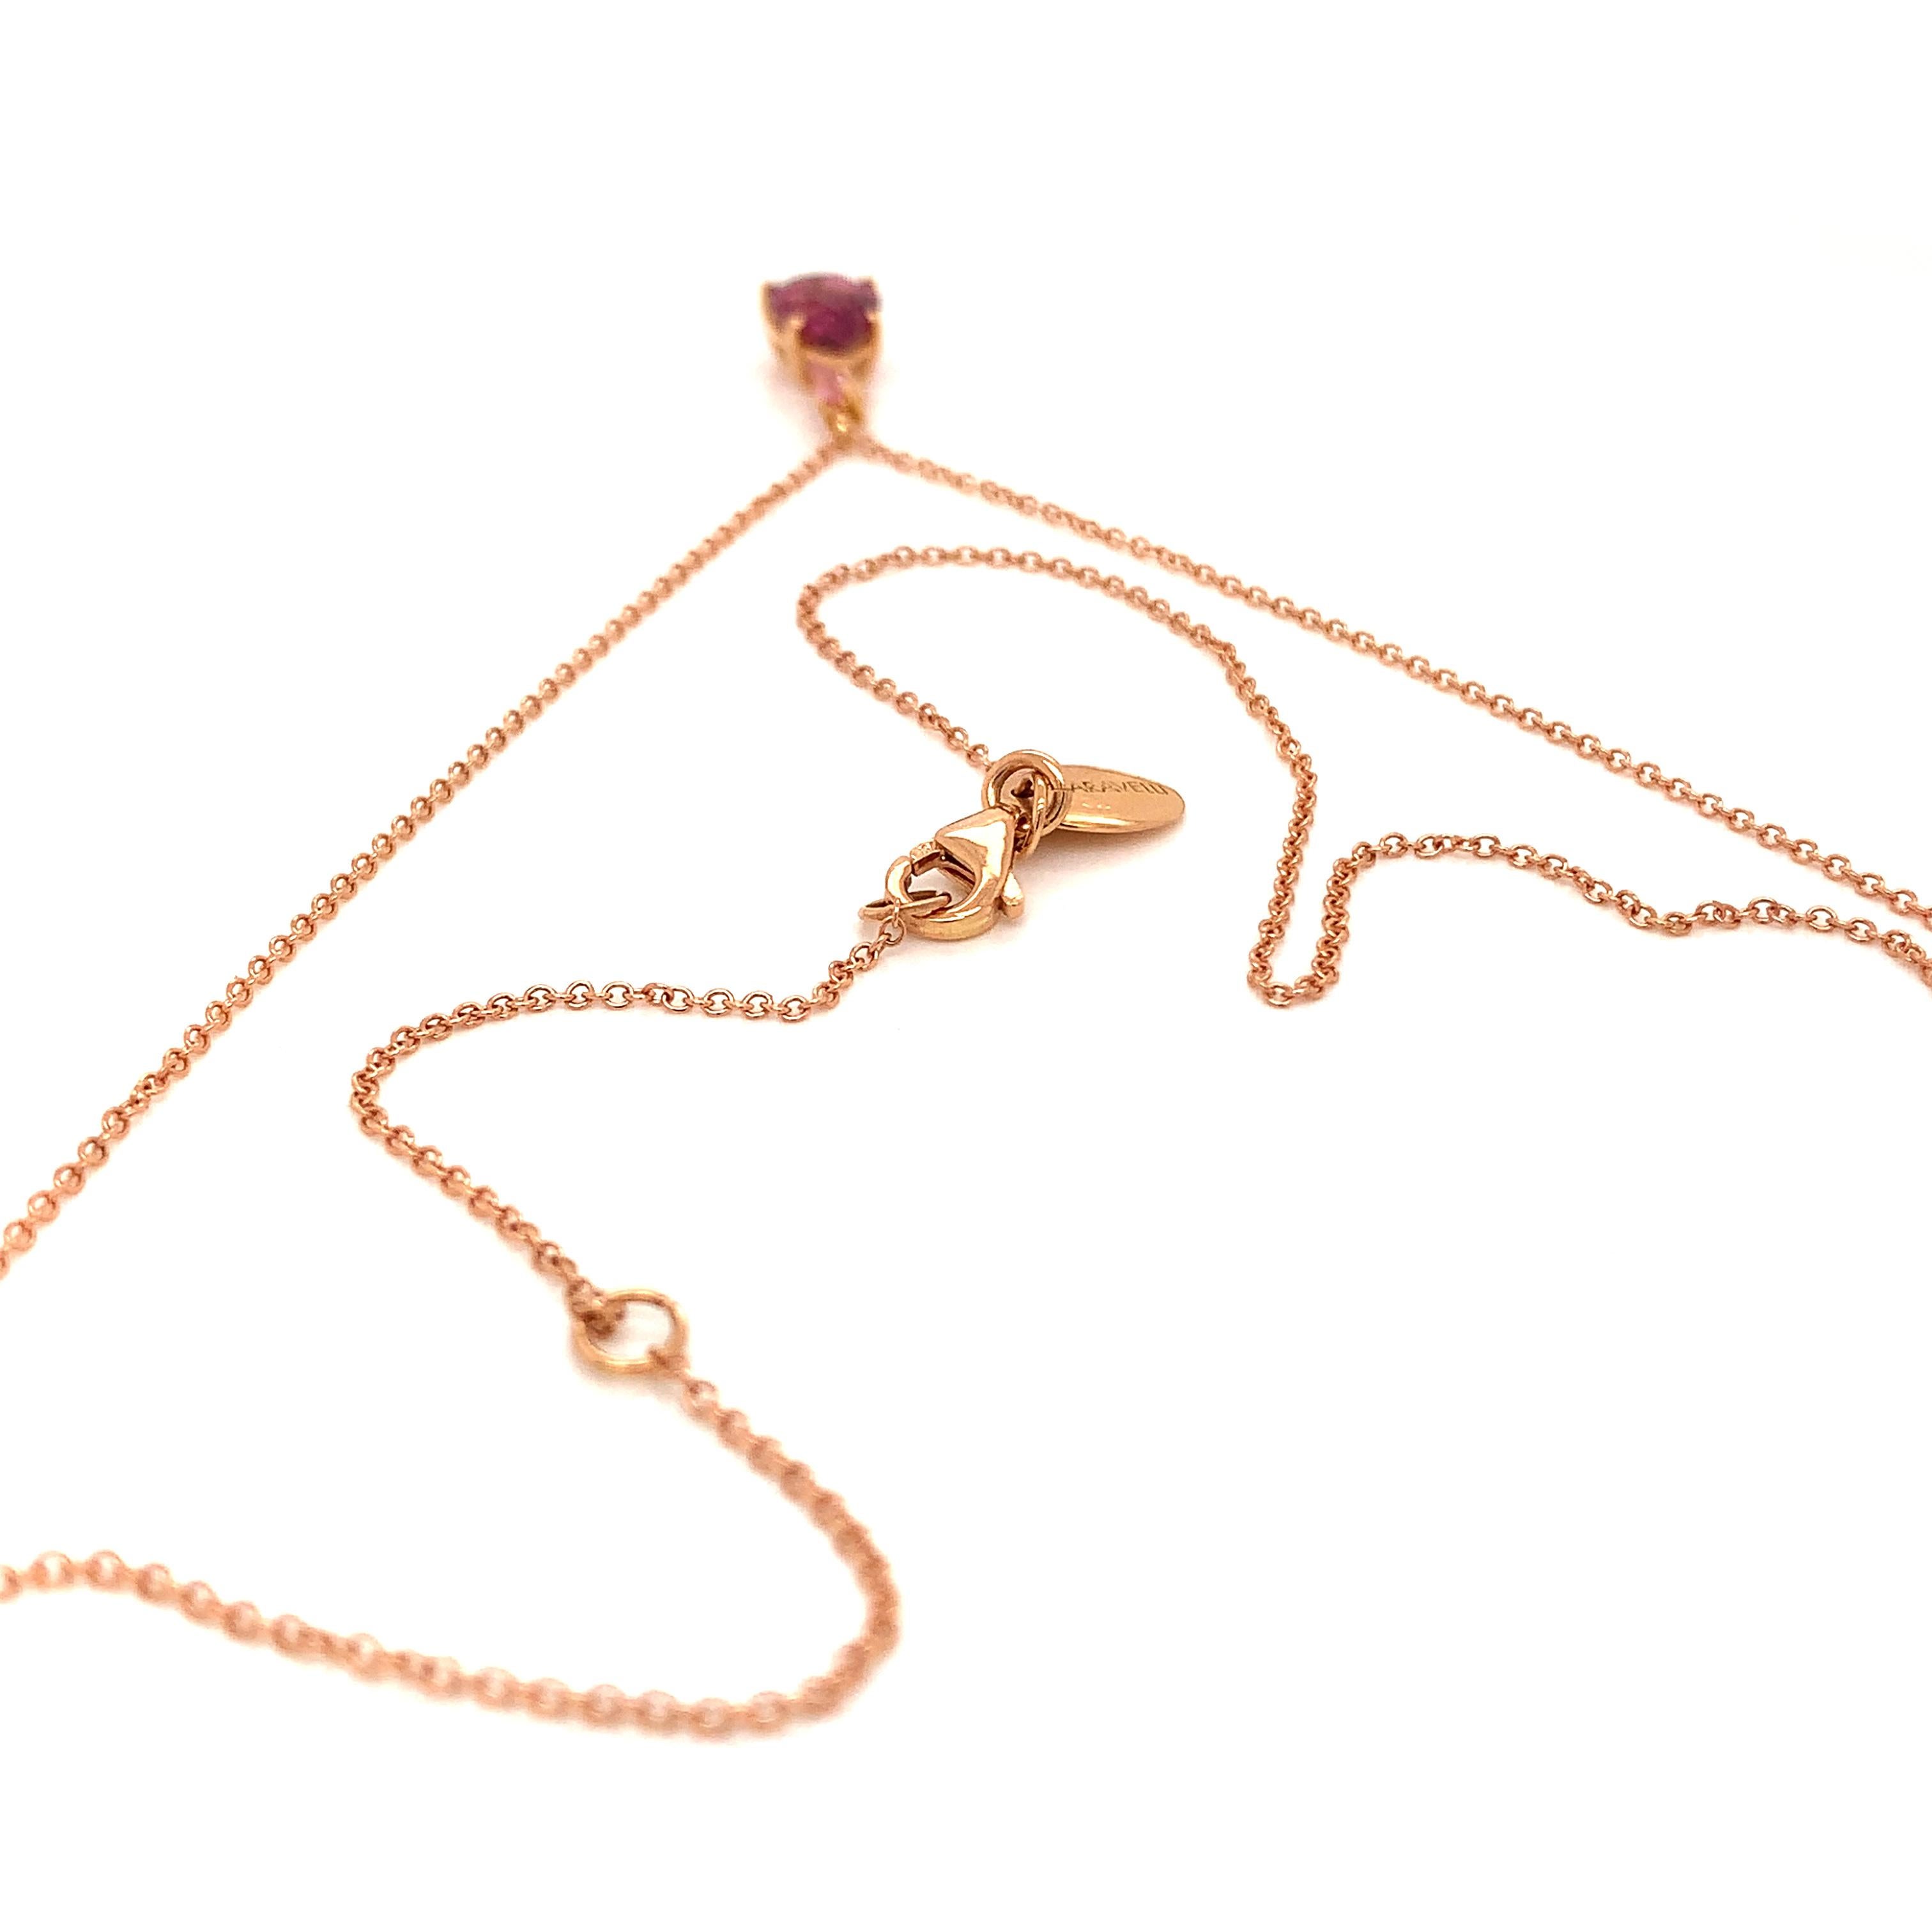 Garavelli pendant with chain in drop design, in rose gold 18 kt with pink tourmaline and pink sapphire, the perfect holiday gift.
The total chain lenght is 44 cm / inches 17 with a loop at 40 cm /15.5 inches
18kt GOLD grs : 2.85
pink tourmaline ct